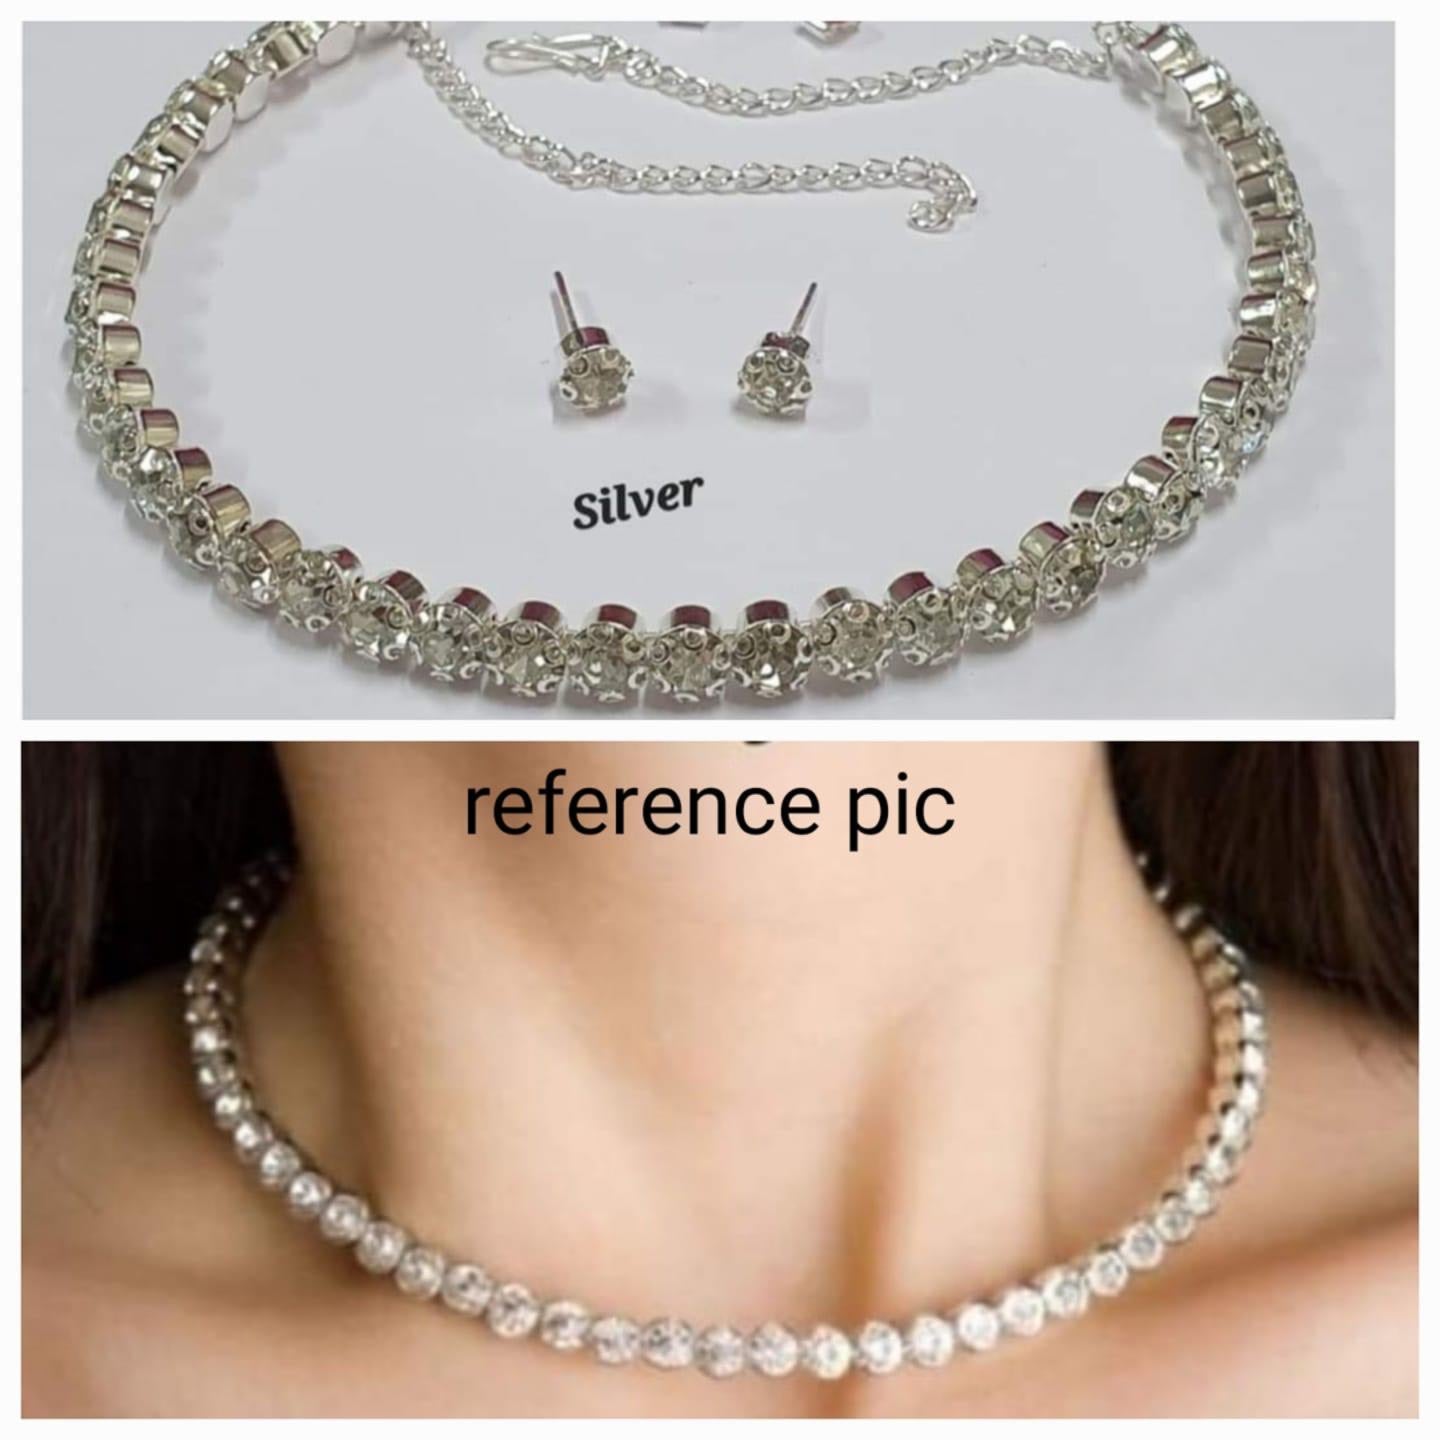 YUEHAO Necklaces for Women, Rhinestone Choker Necklace Diamond Heart  Necklaces 2 Rows Chain Jewelry For Women Girls Trendy Pendants Silver -  Walmart.com